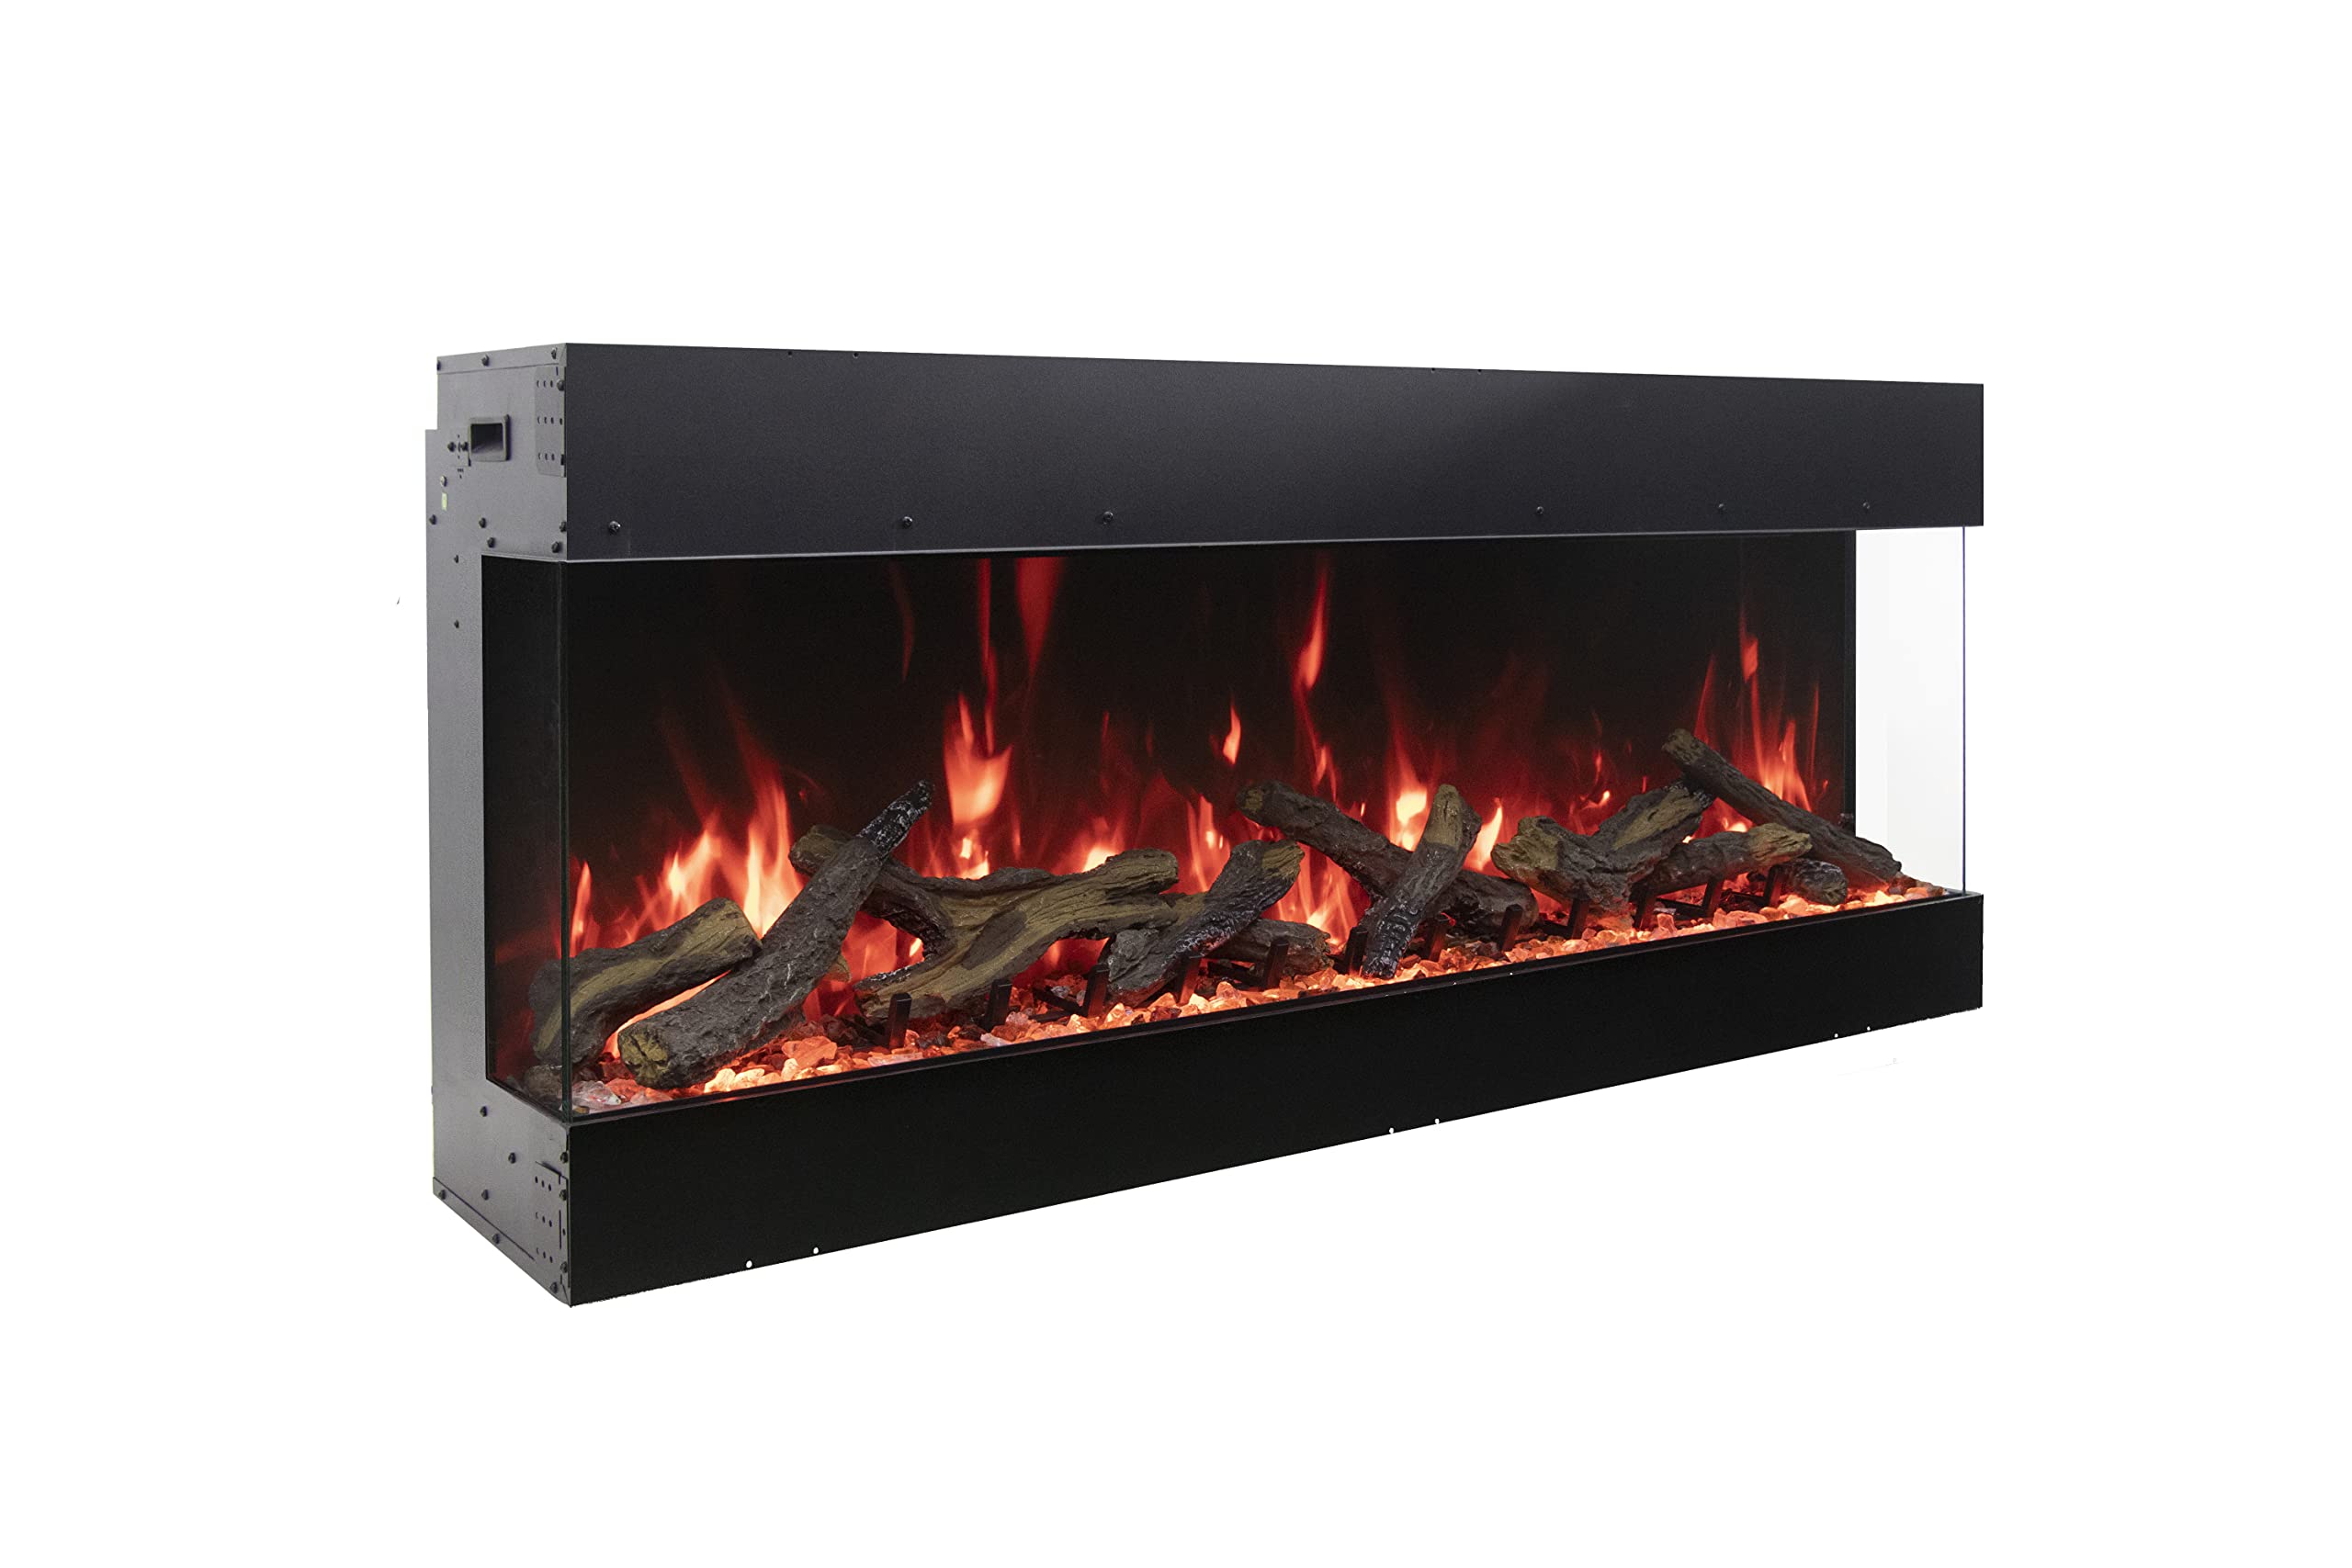 Tru View Bespoke  45? Indoor / Outdoor, WiFi Enabled, Bluetooth Capable 3 Sided Fireplace  Featuring a Glass Viewing Height of